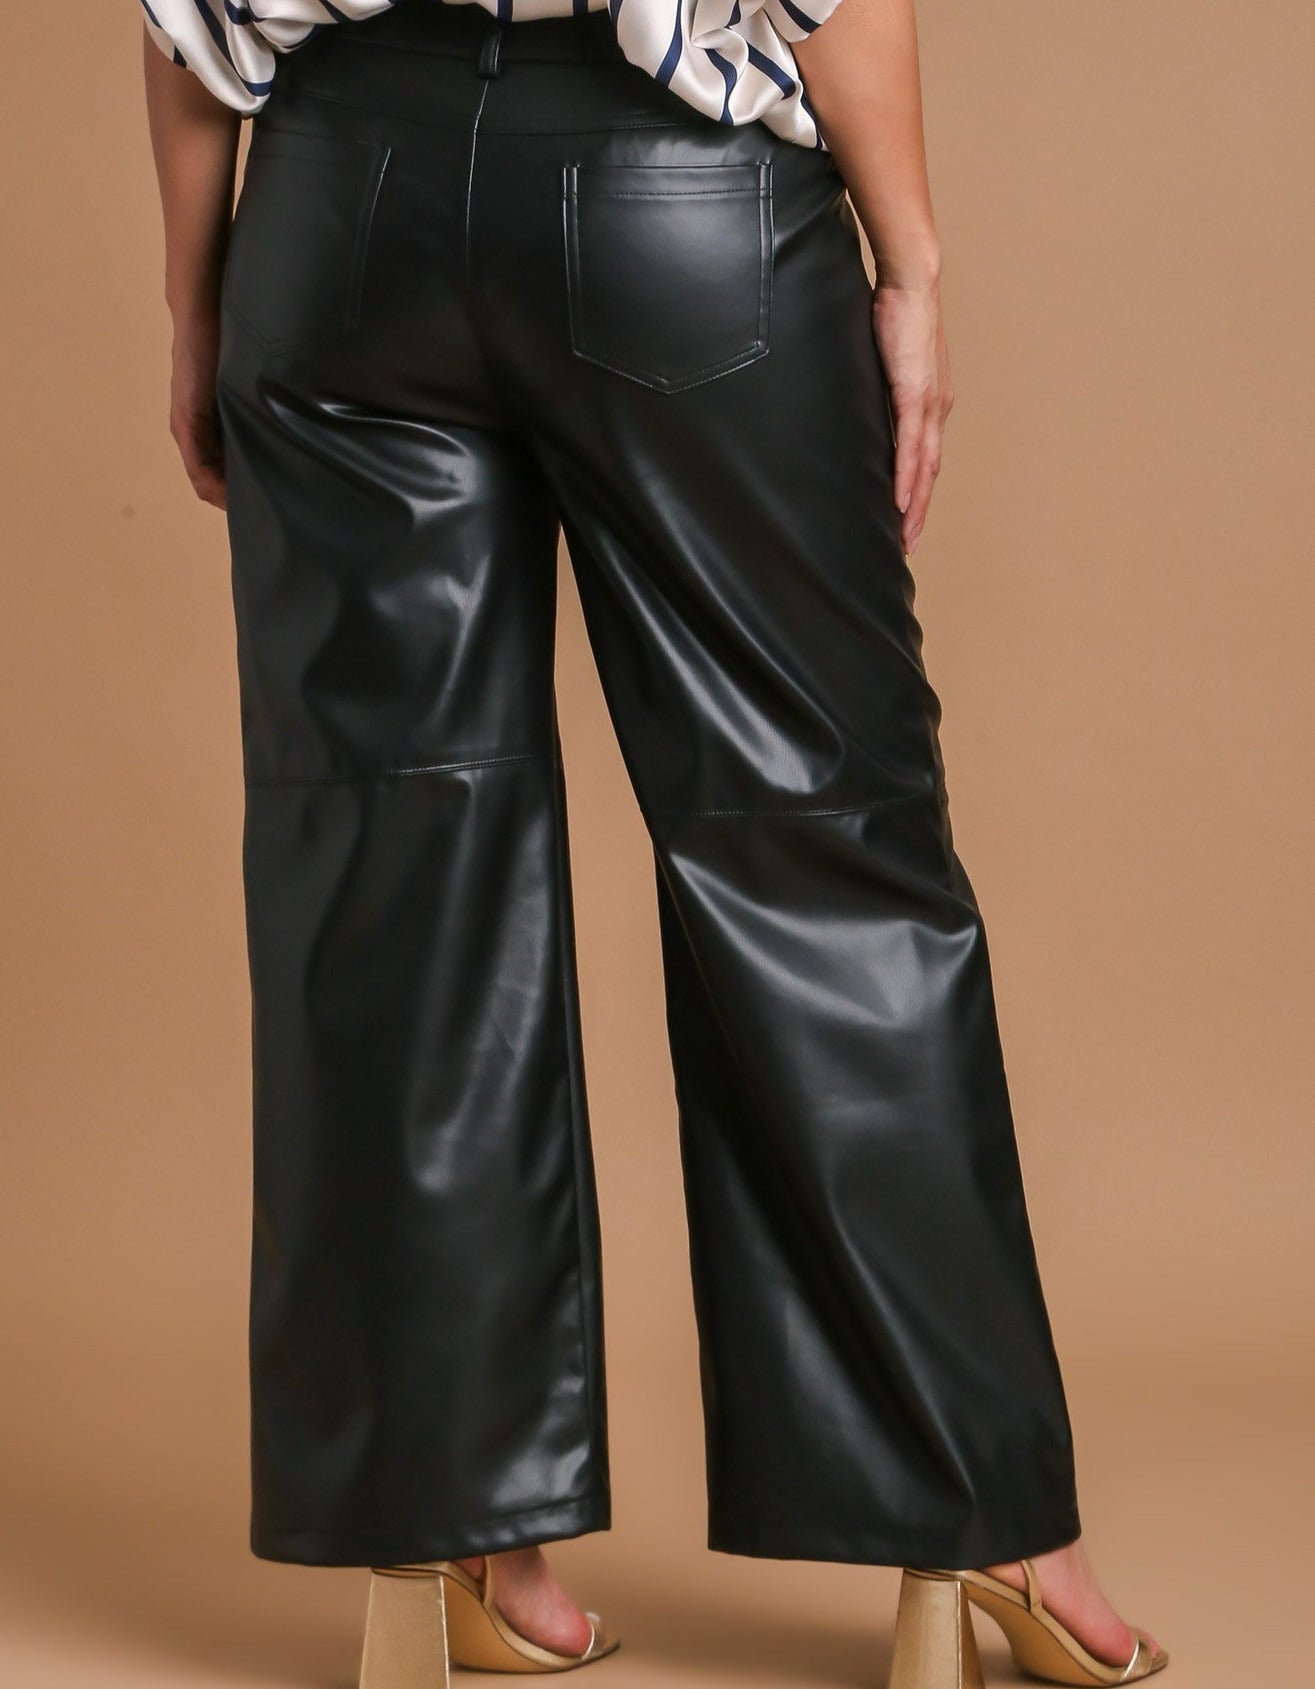 Super Chic Faux Leather Pants (XL to 2XL)